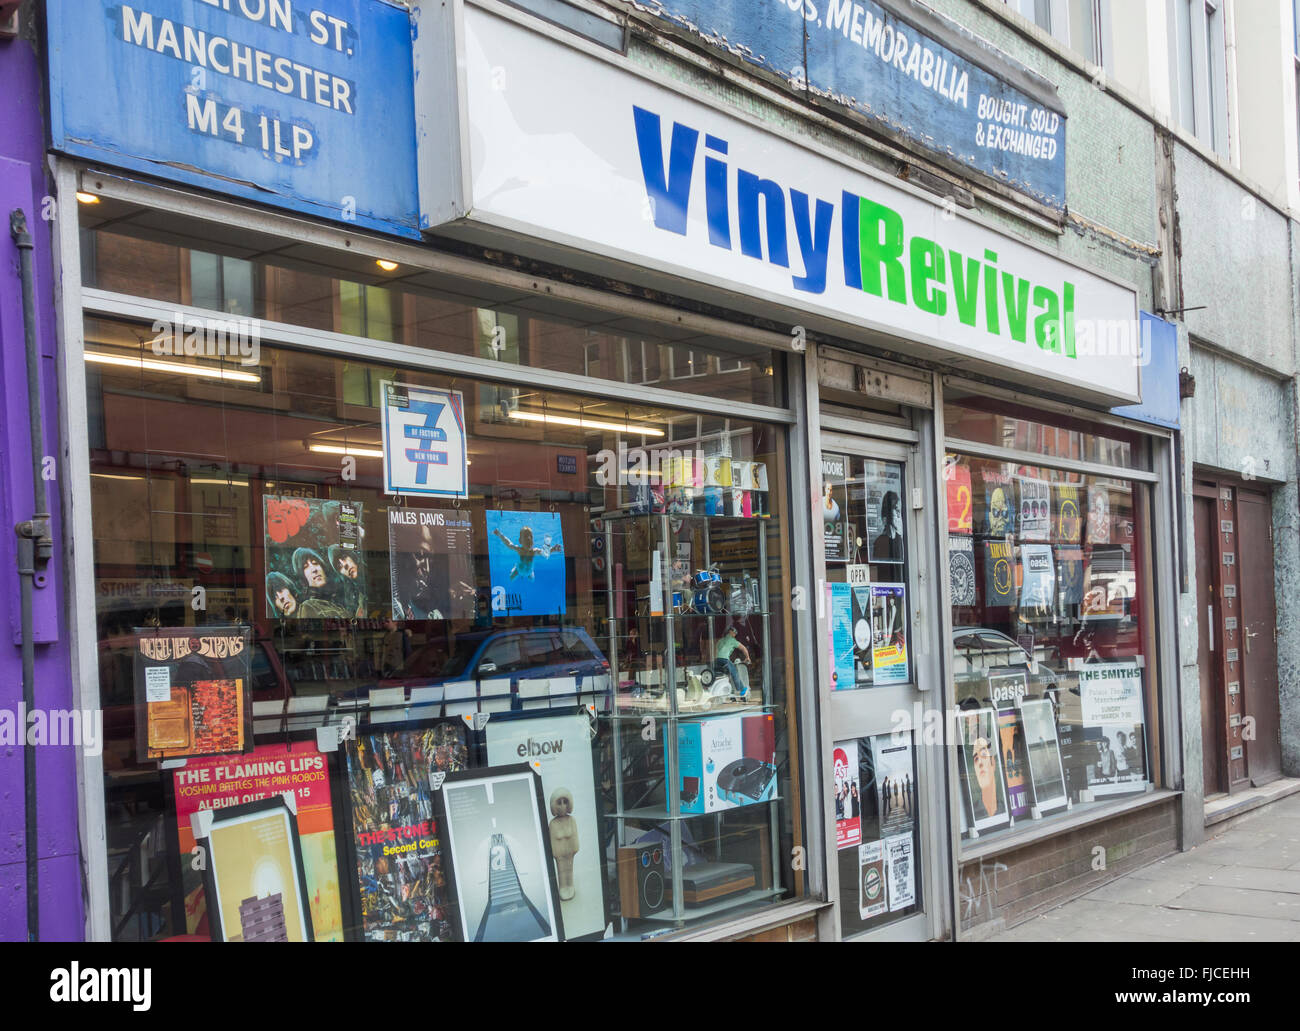 Vinyl Revival record shop on Hilton street in Manchester’s Northern Quarter. Manchester, England. UK Stock Photo